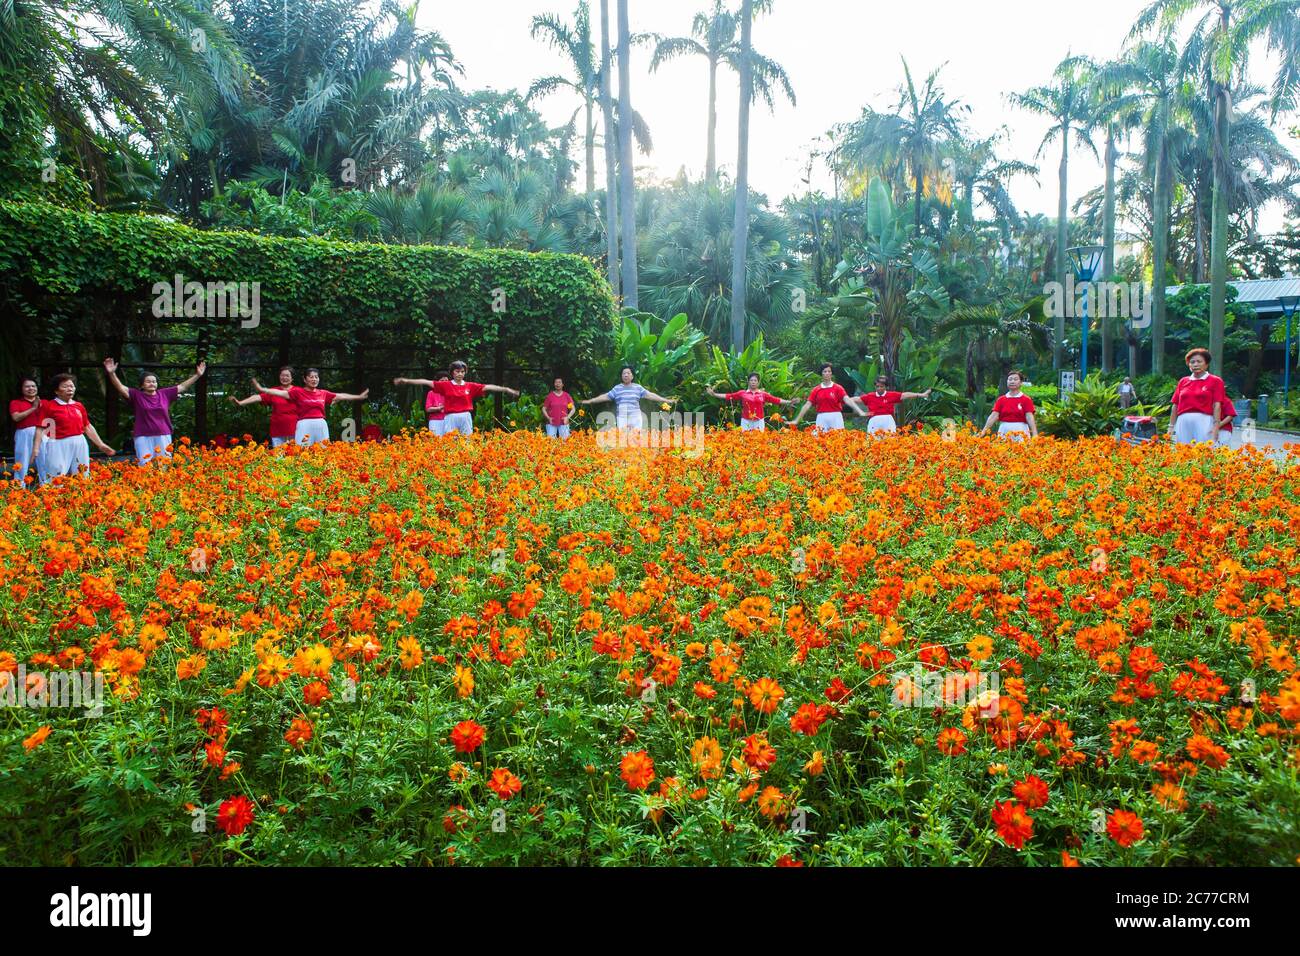 Group of middle-aged to elderly woman having their early morning exercise in front of school of orange colour flowers Stock Photo